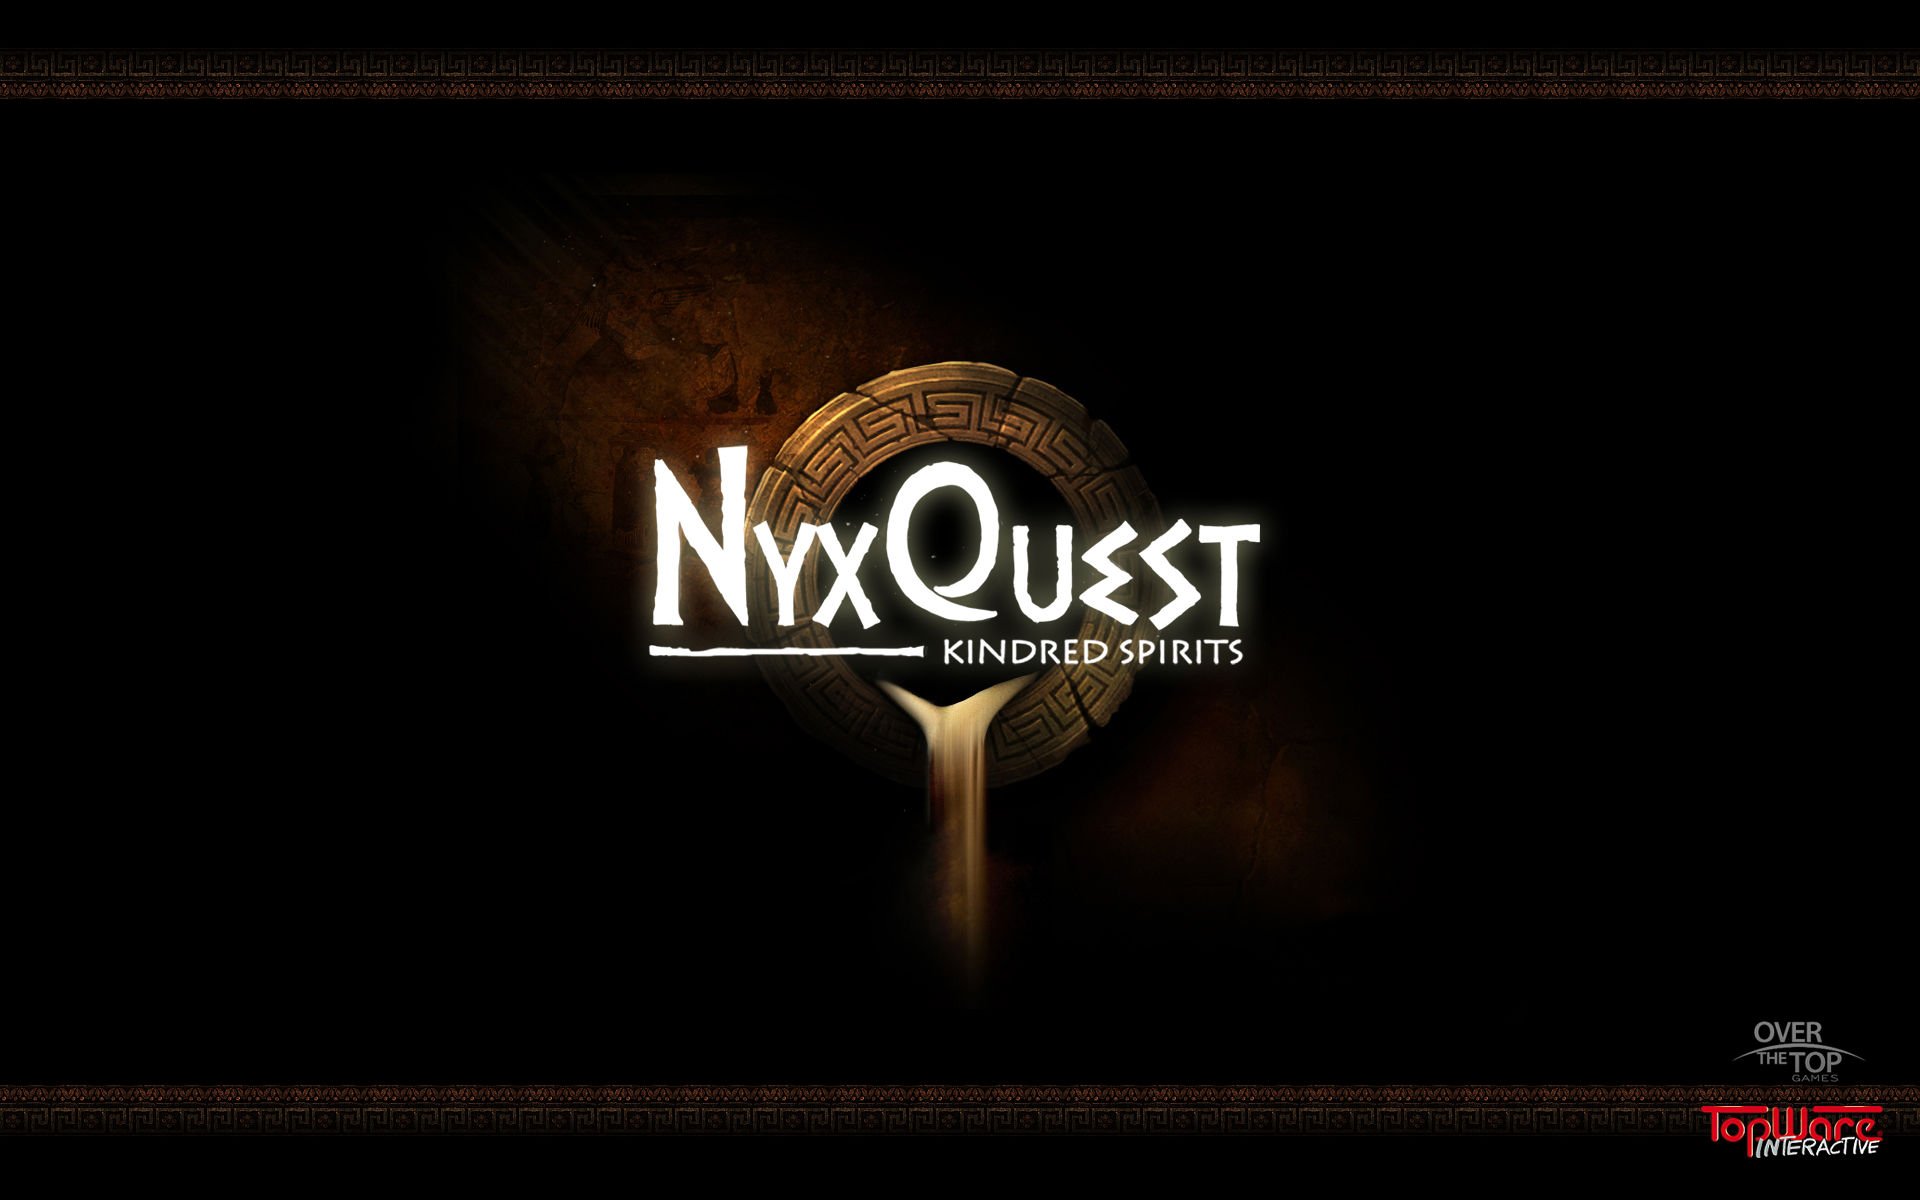 nyxquest, Platform, Fantasy, Greece, Gods, God, 1nyxquest, Icarian, Puzzle, Nintendo, Wii, Action, Nyx, Quest, Poster Wallpaper